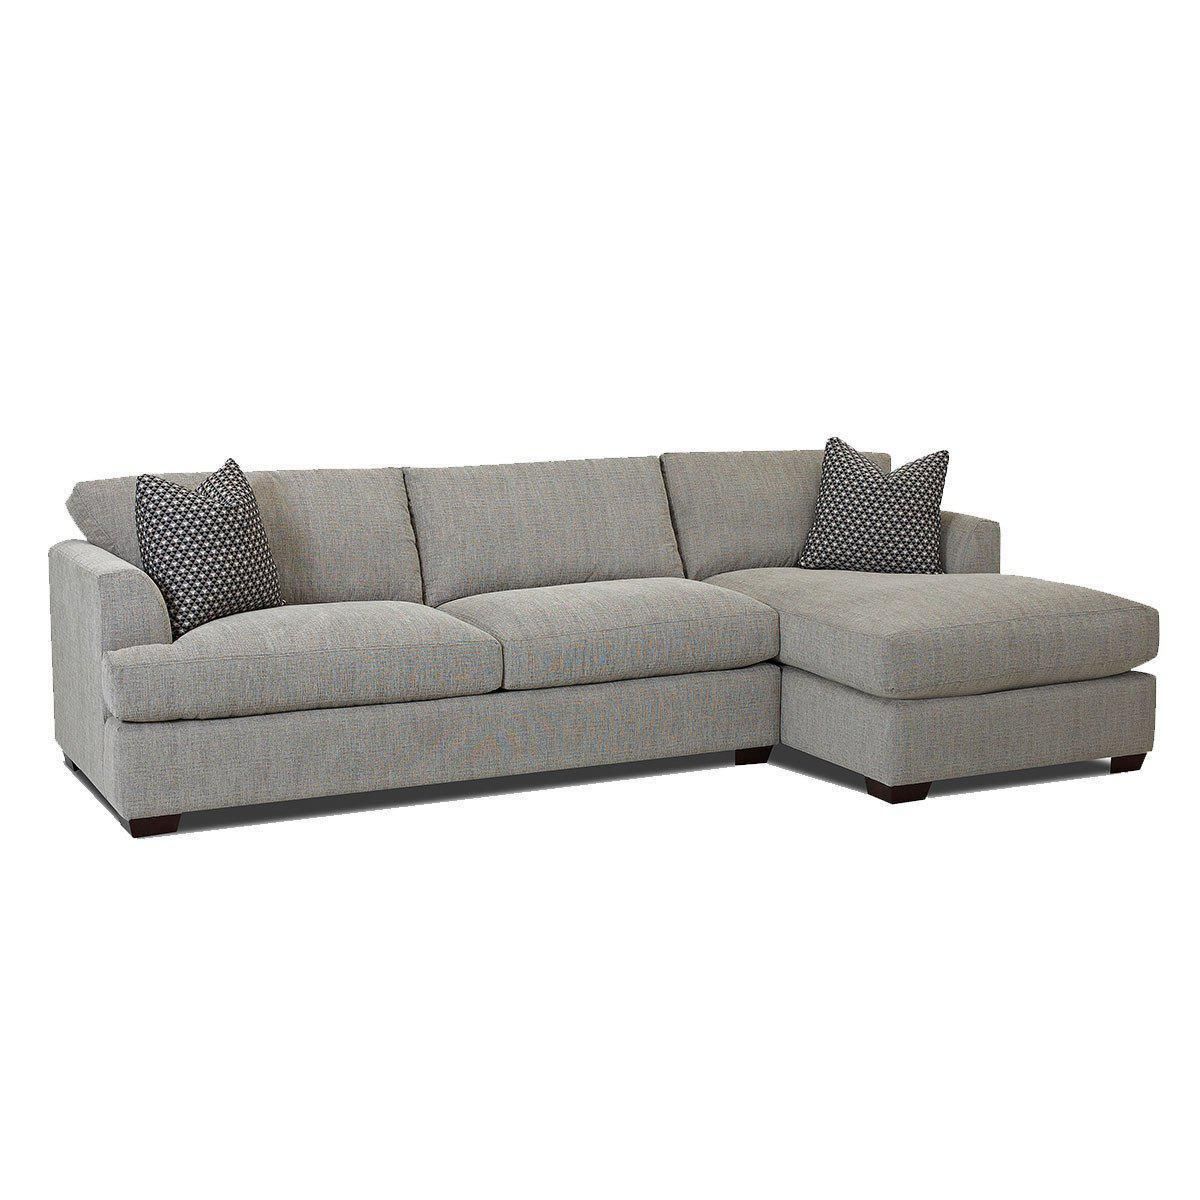 Jennifer Furniture'S Bentley 2 Piece Sectional Comes In Inside 2Pc Maddox Left Arm Facing Sectional Sofas With Chaise Brown (View 14 of 15)